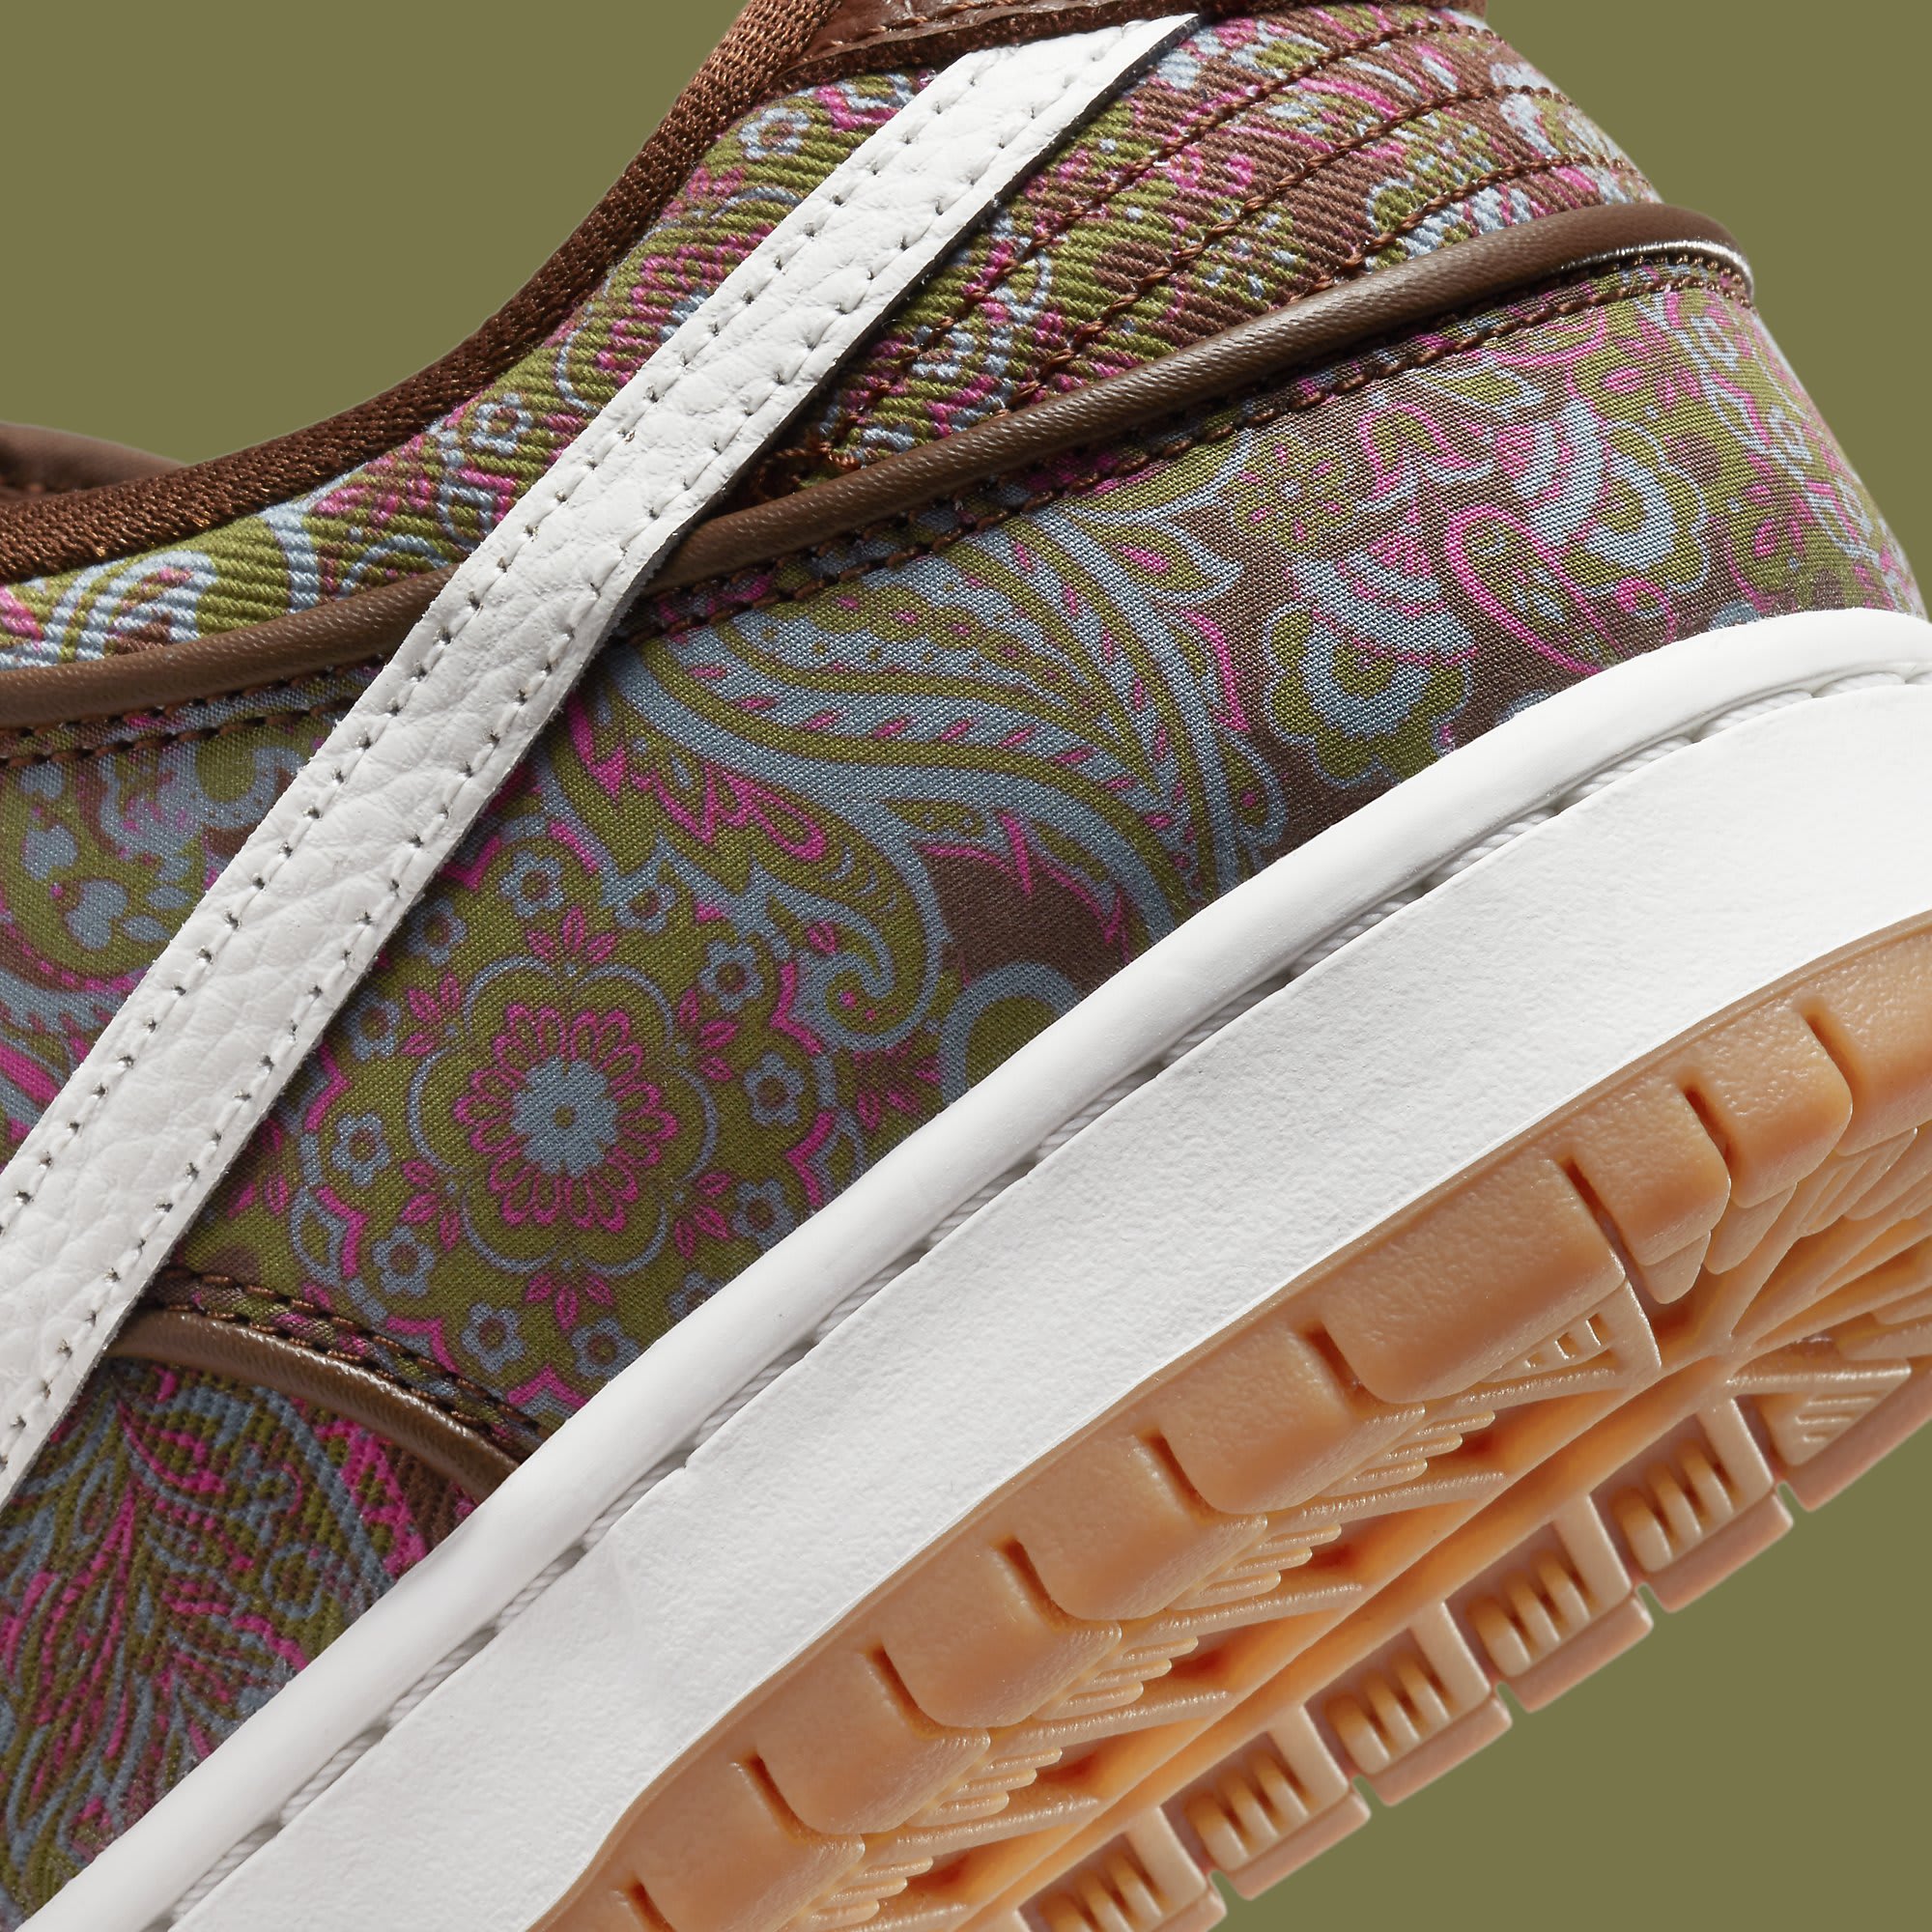 Paisley Prints Cover This Nike SB Dunk   Complex